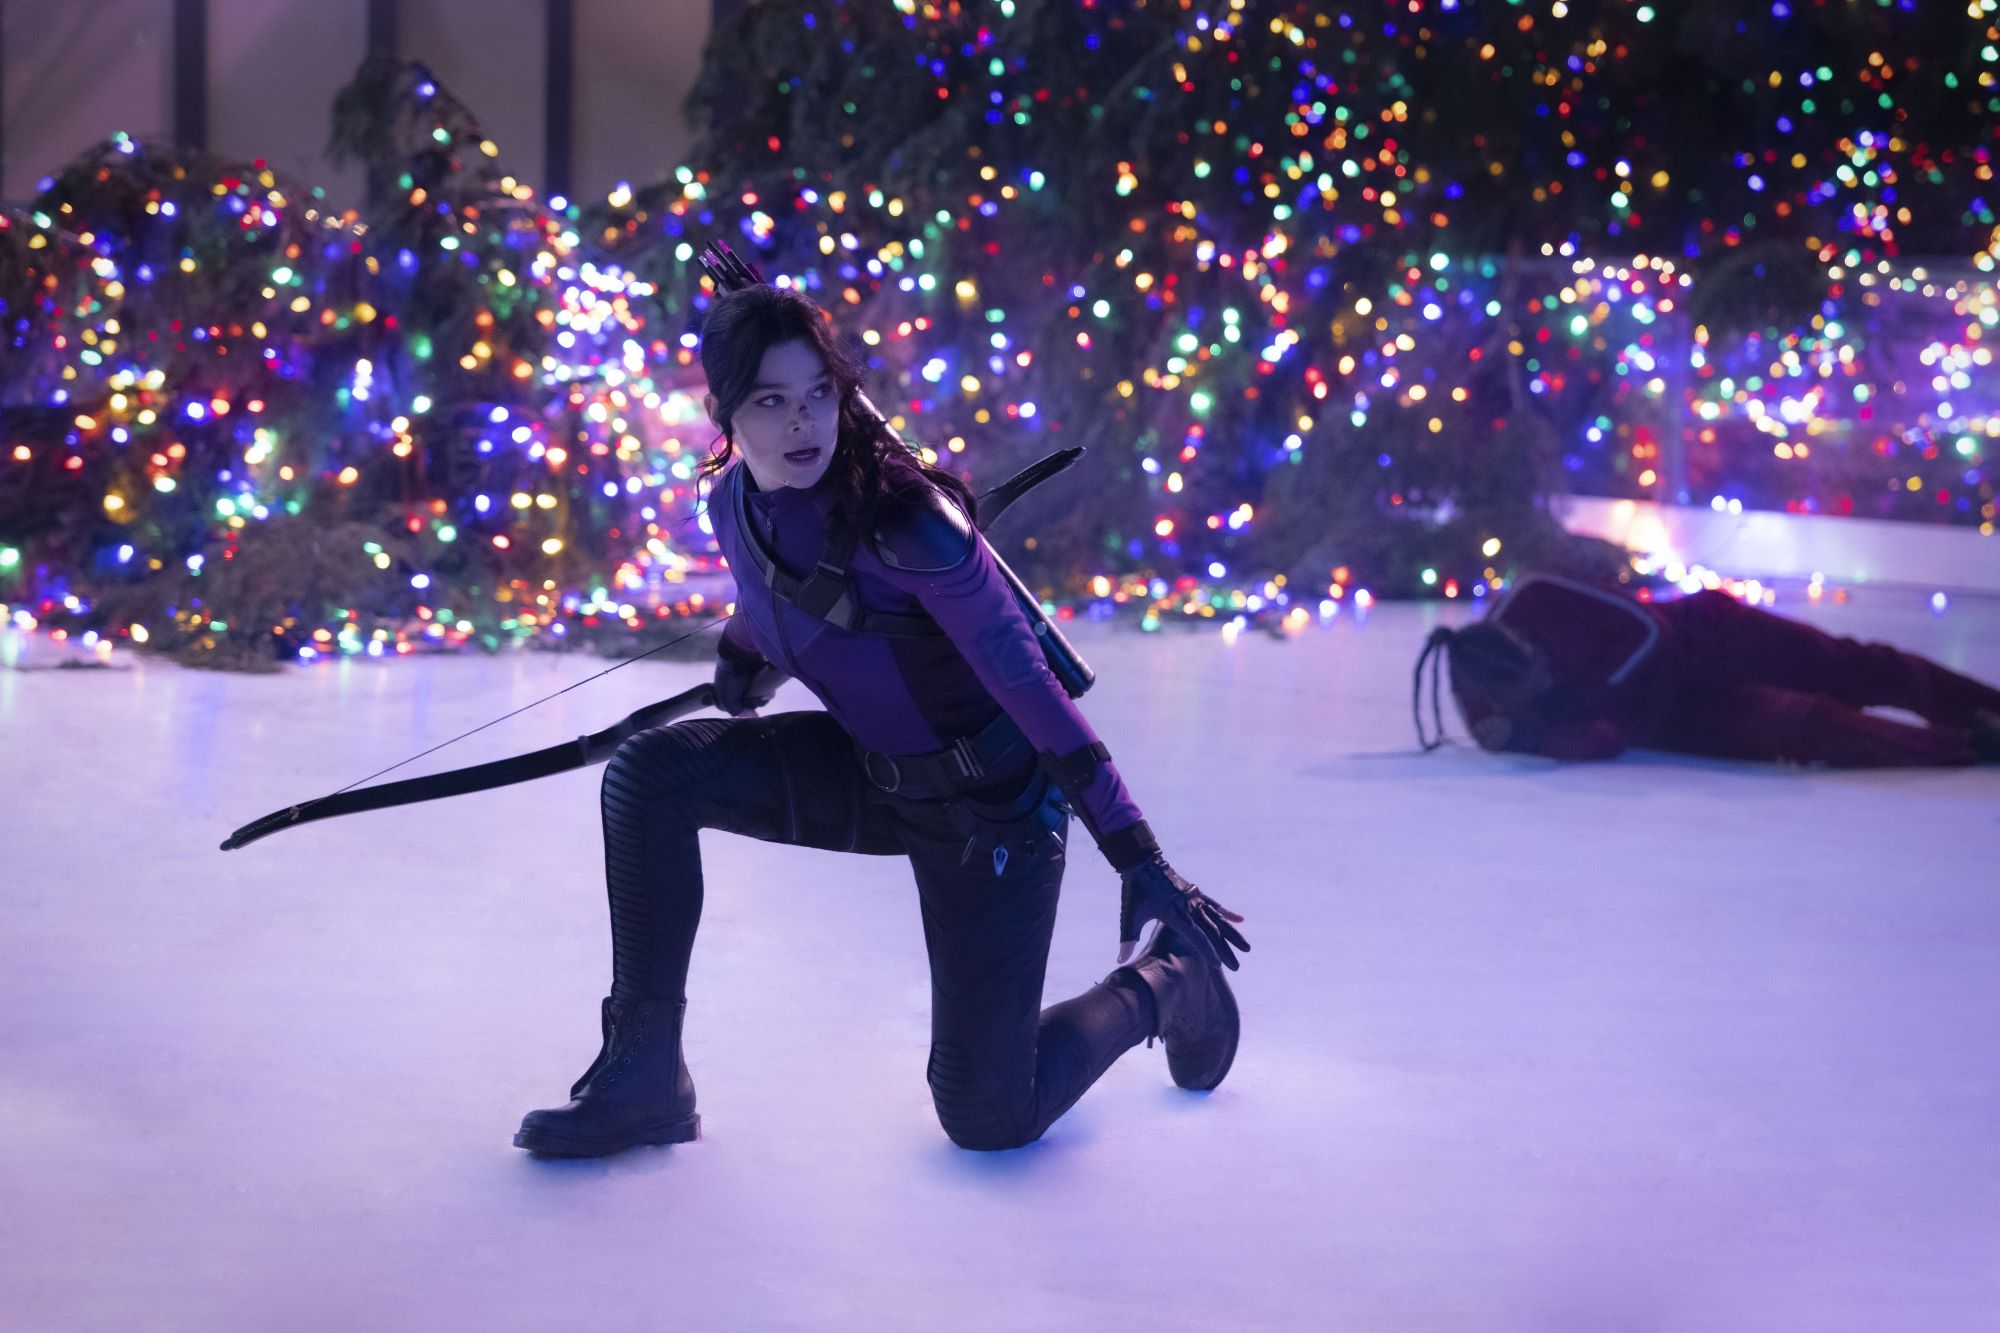 Hailee Steinfeld, in character as Kate Bishop in 'Hawkeye' Episode 6, wears her purple superhero suit and wields her bow and arrow.